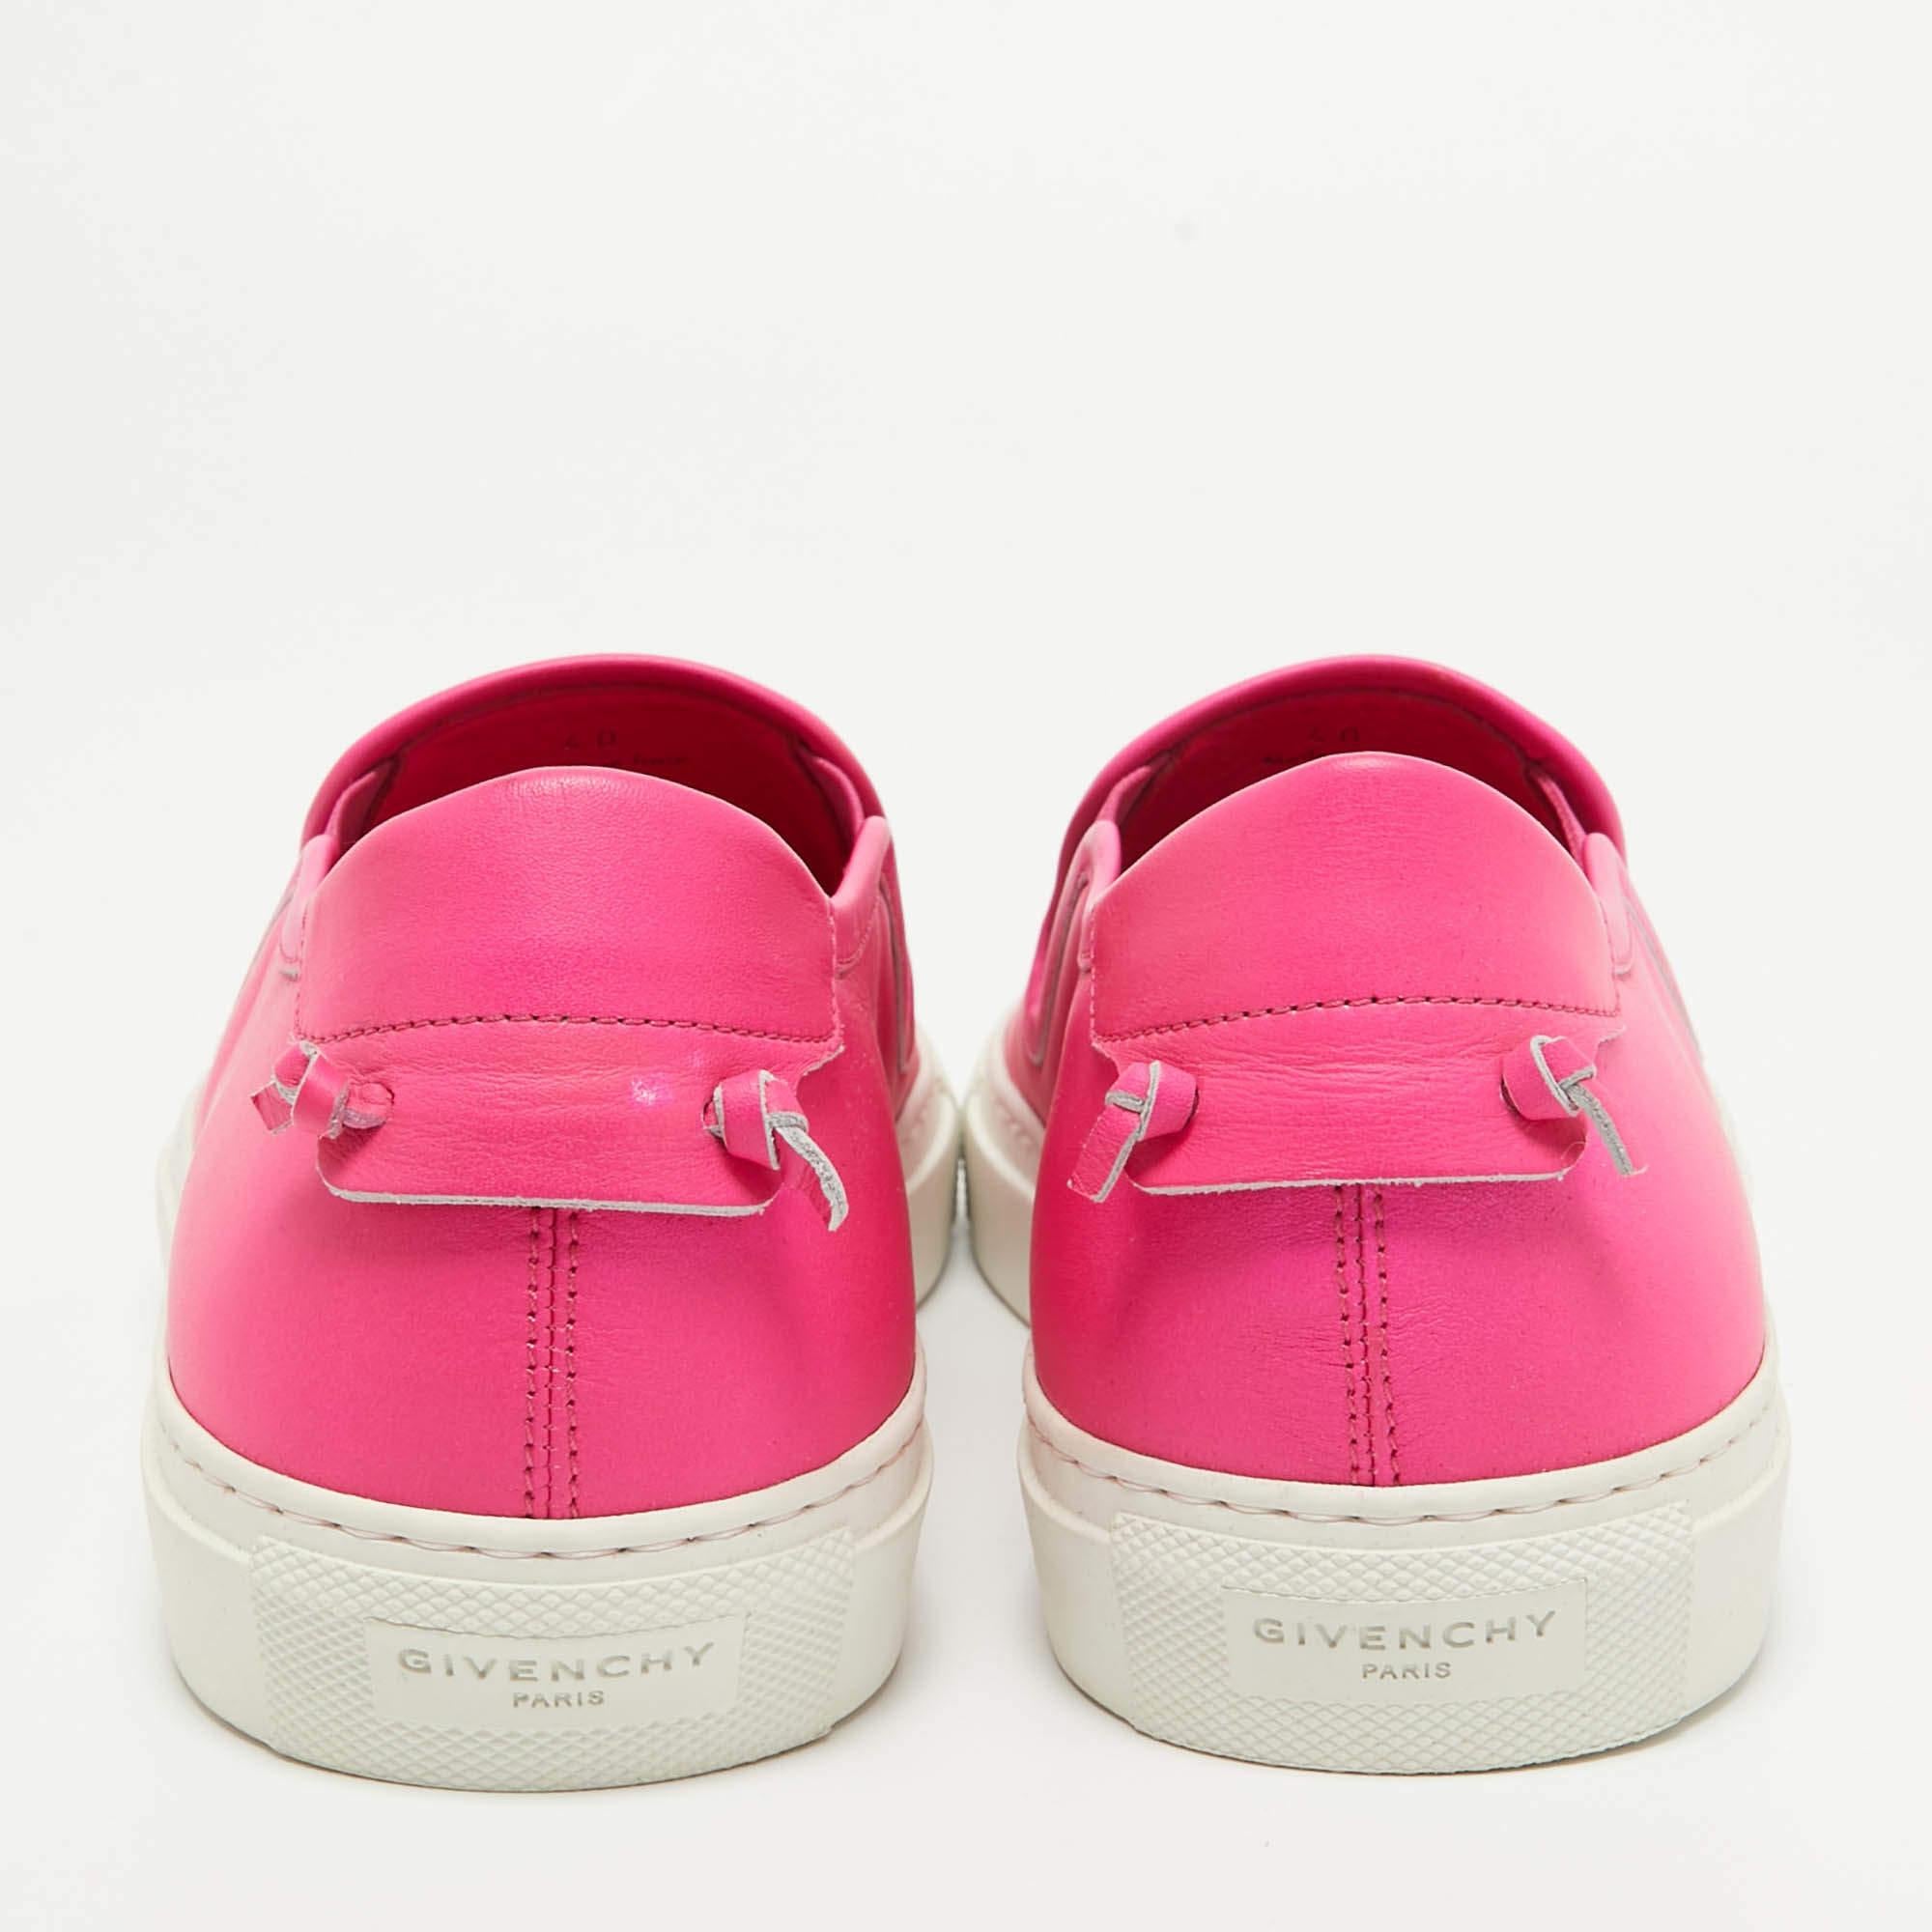 Givenchy Pink Leather Slip On Sneakers Size 40 For Sale 2